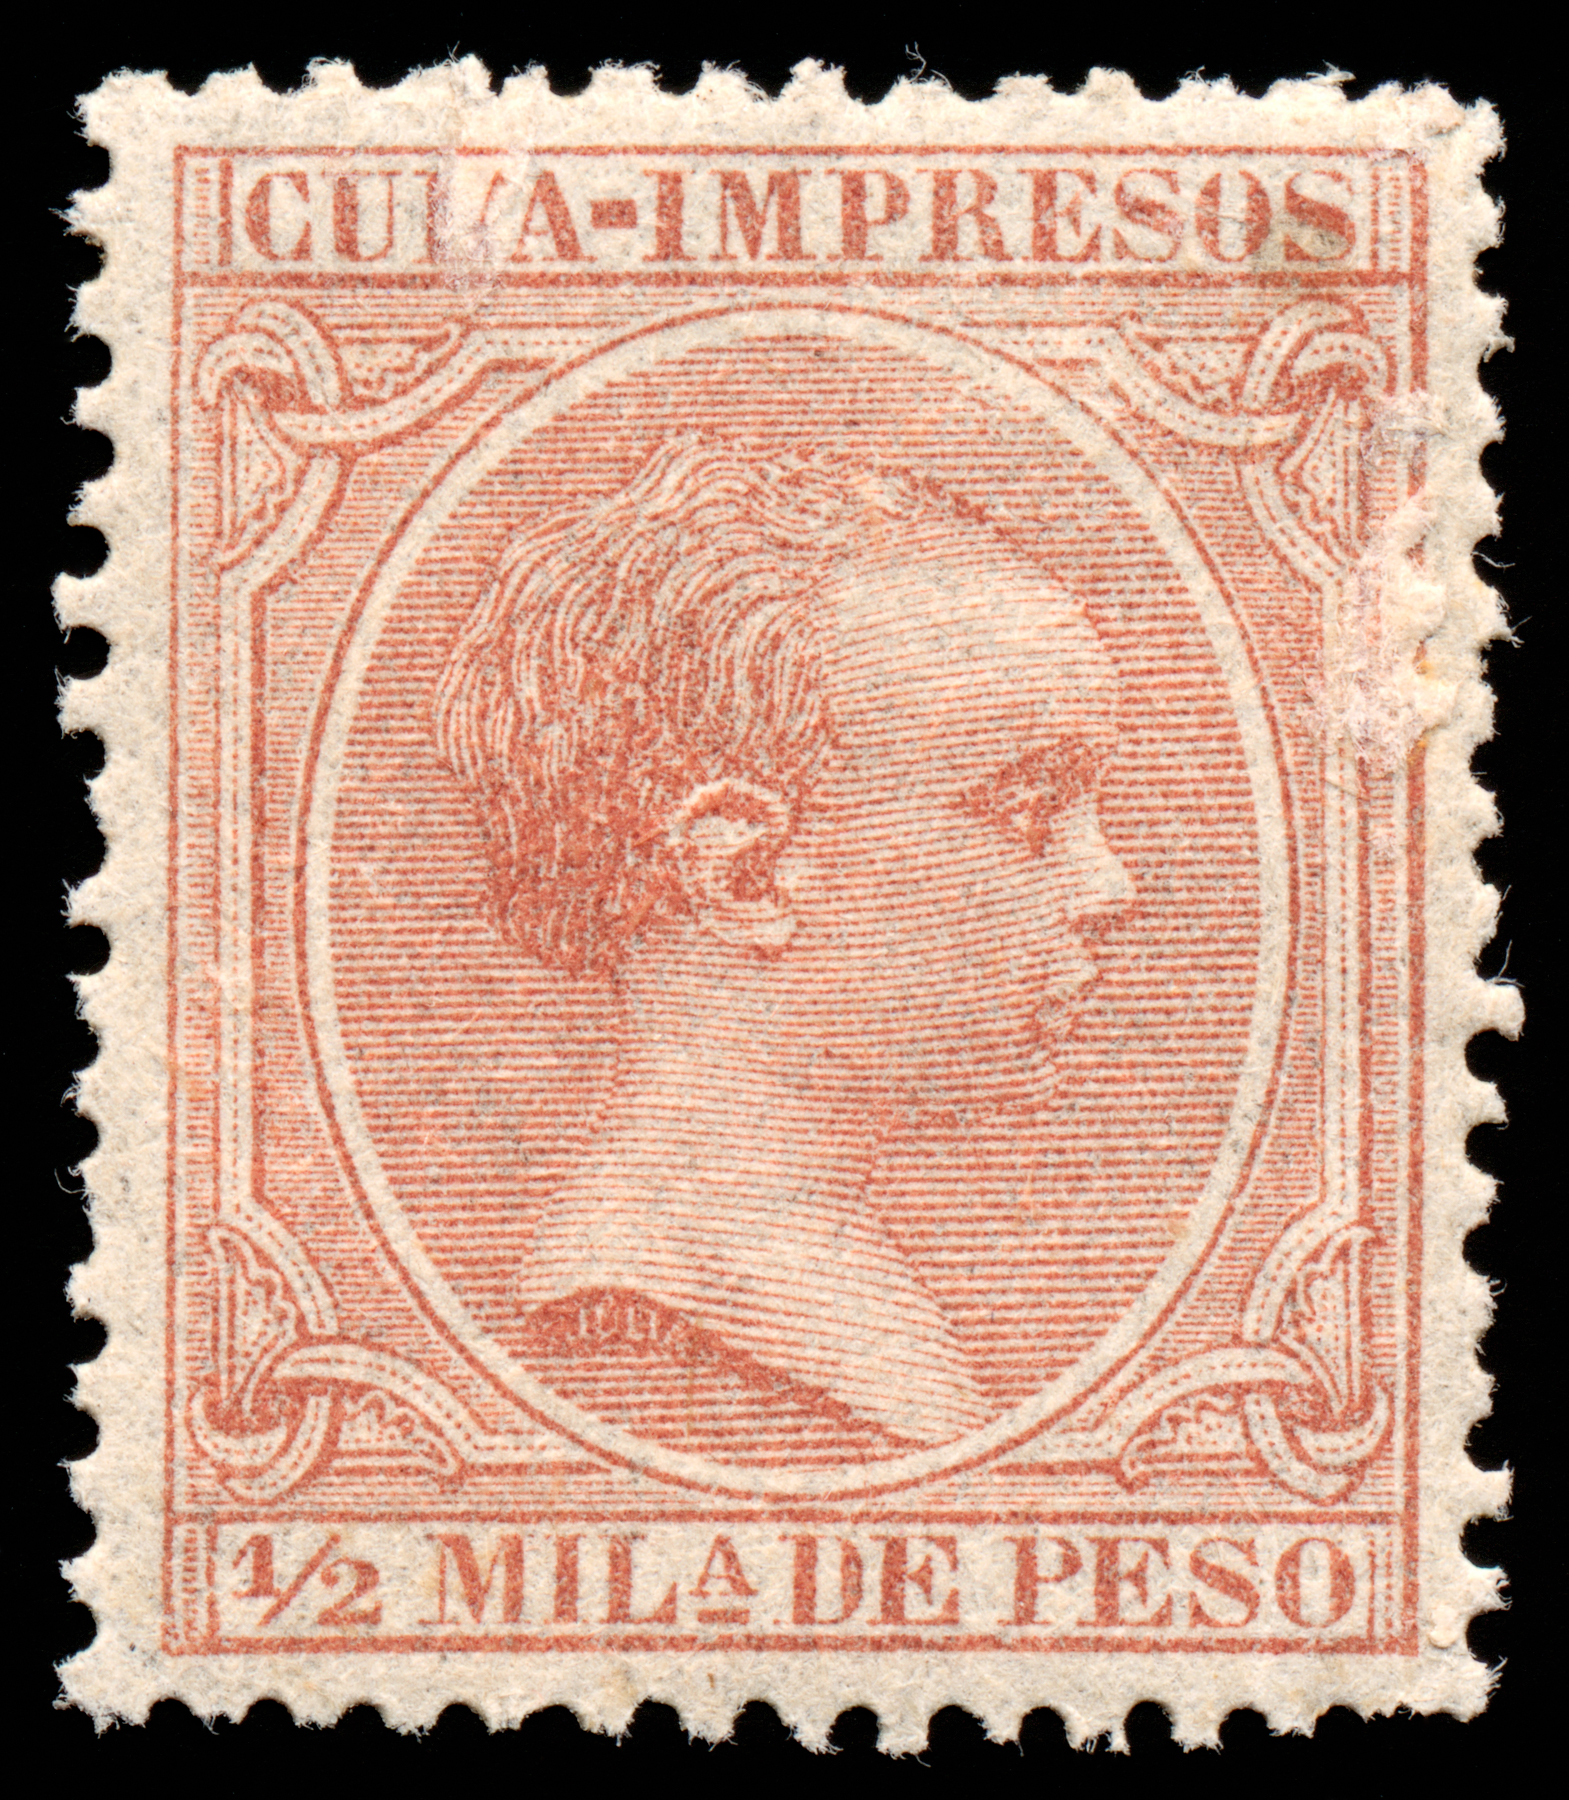 Brown king alfonso xiii stamp photo